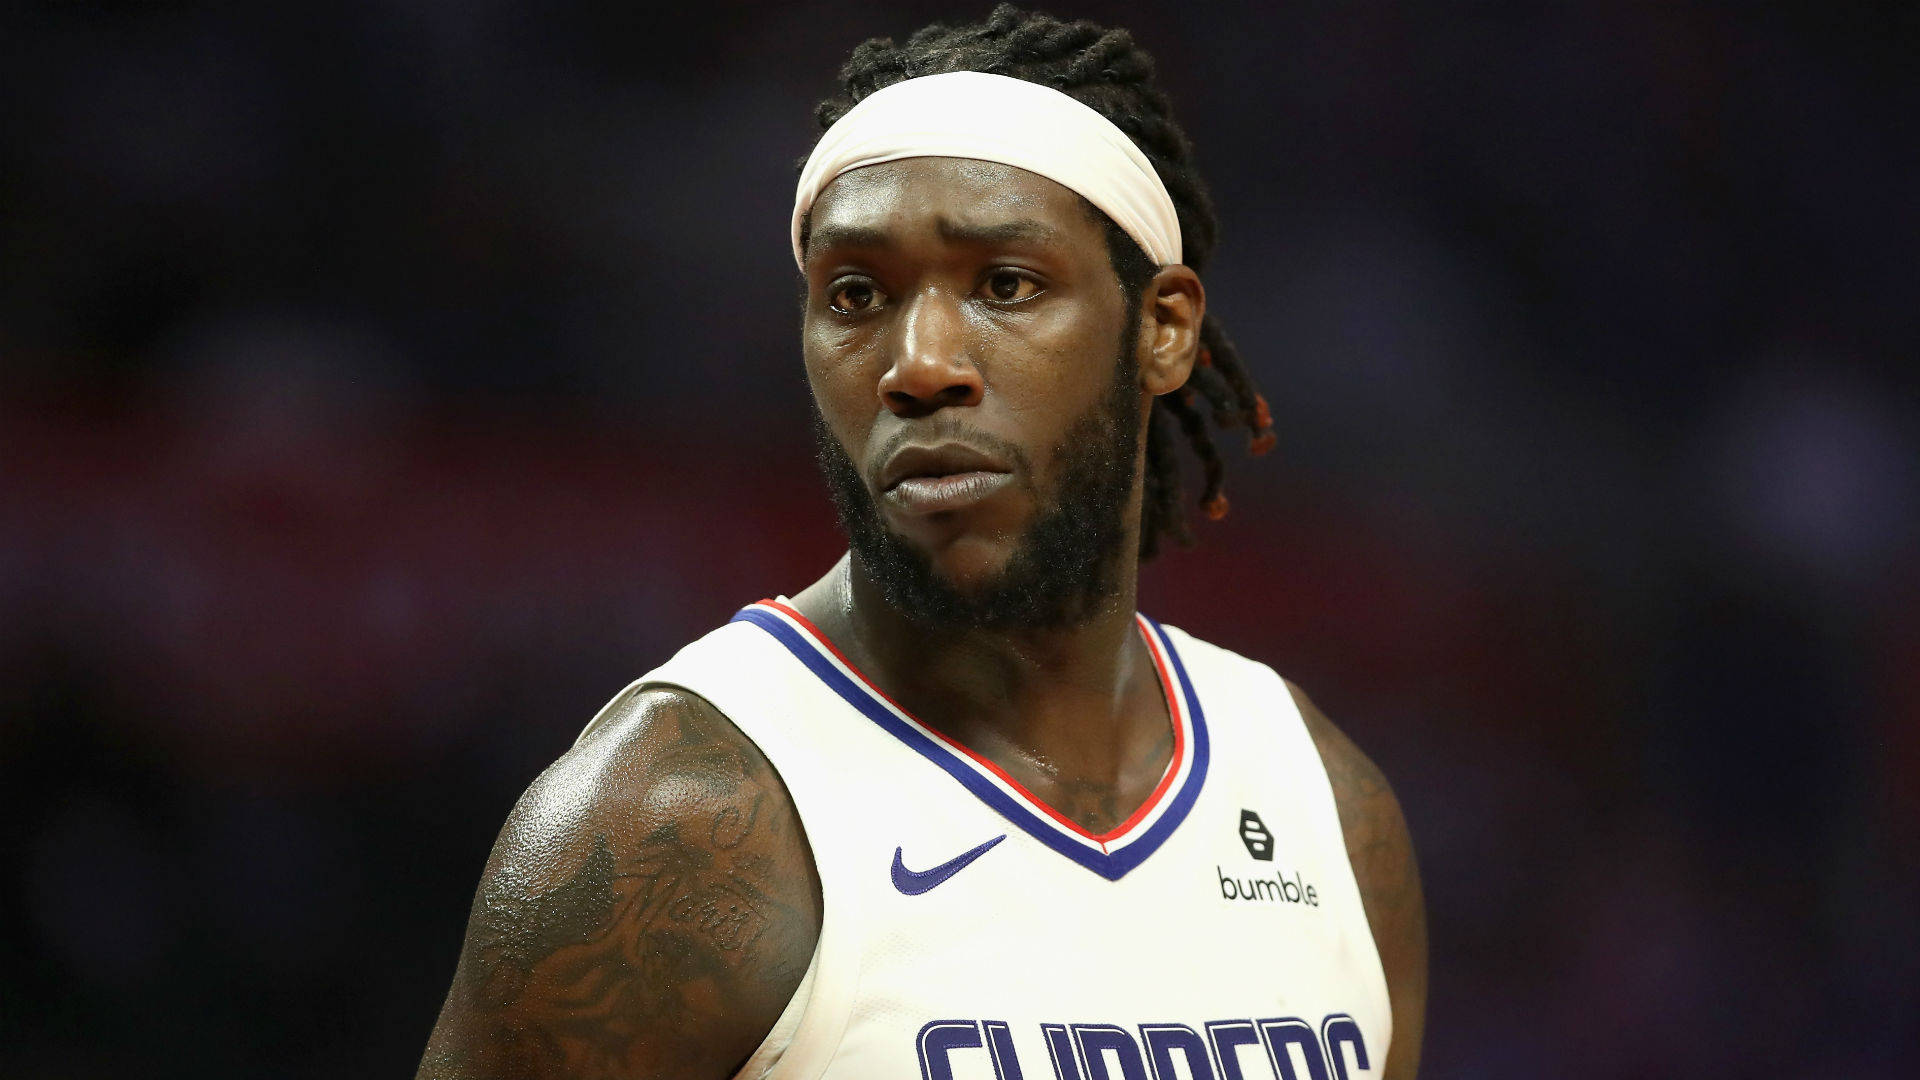 Serious Look Of Montrezl Harrell Background